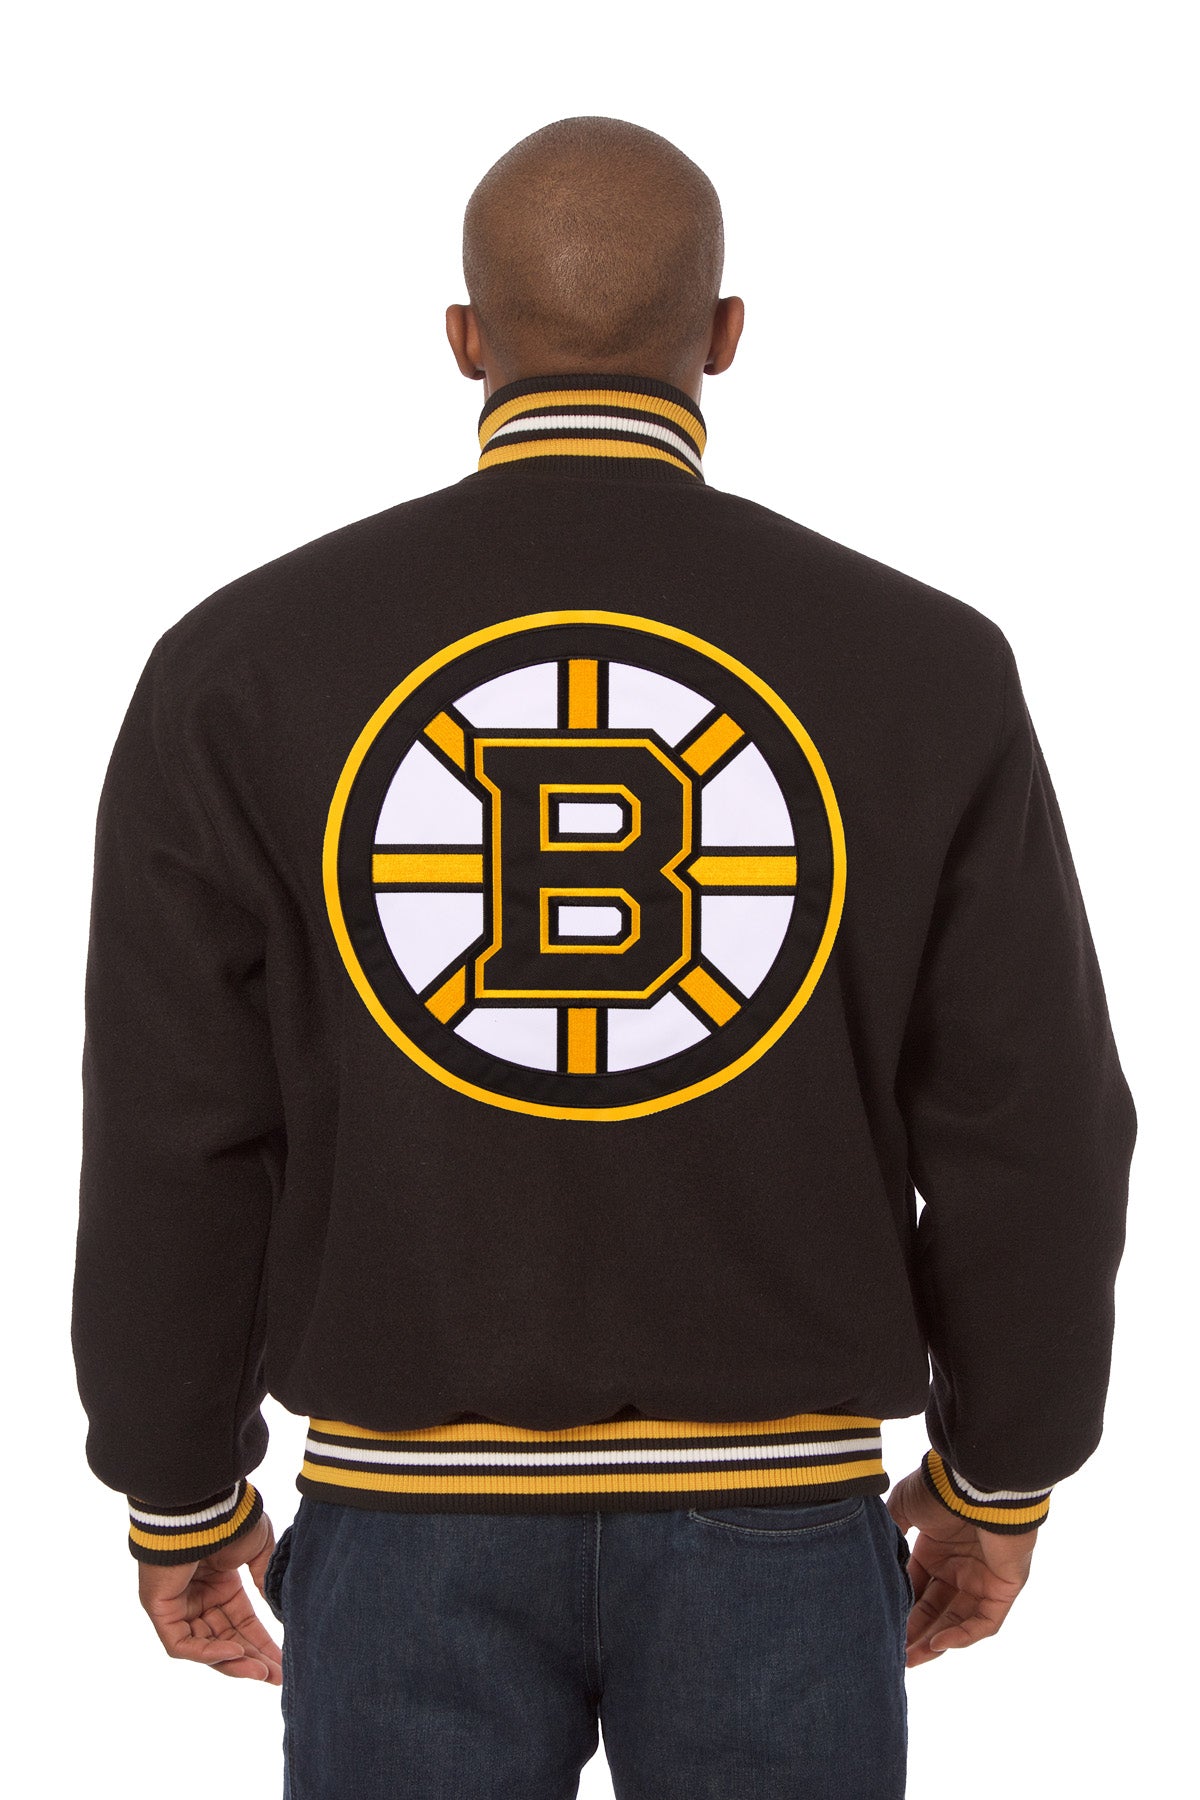 Boston Bruins Embroidered Wool Jacket